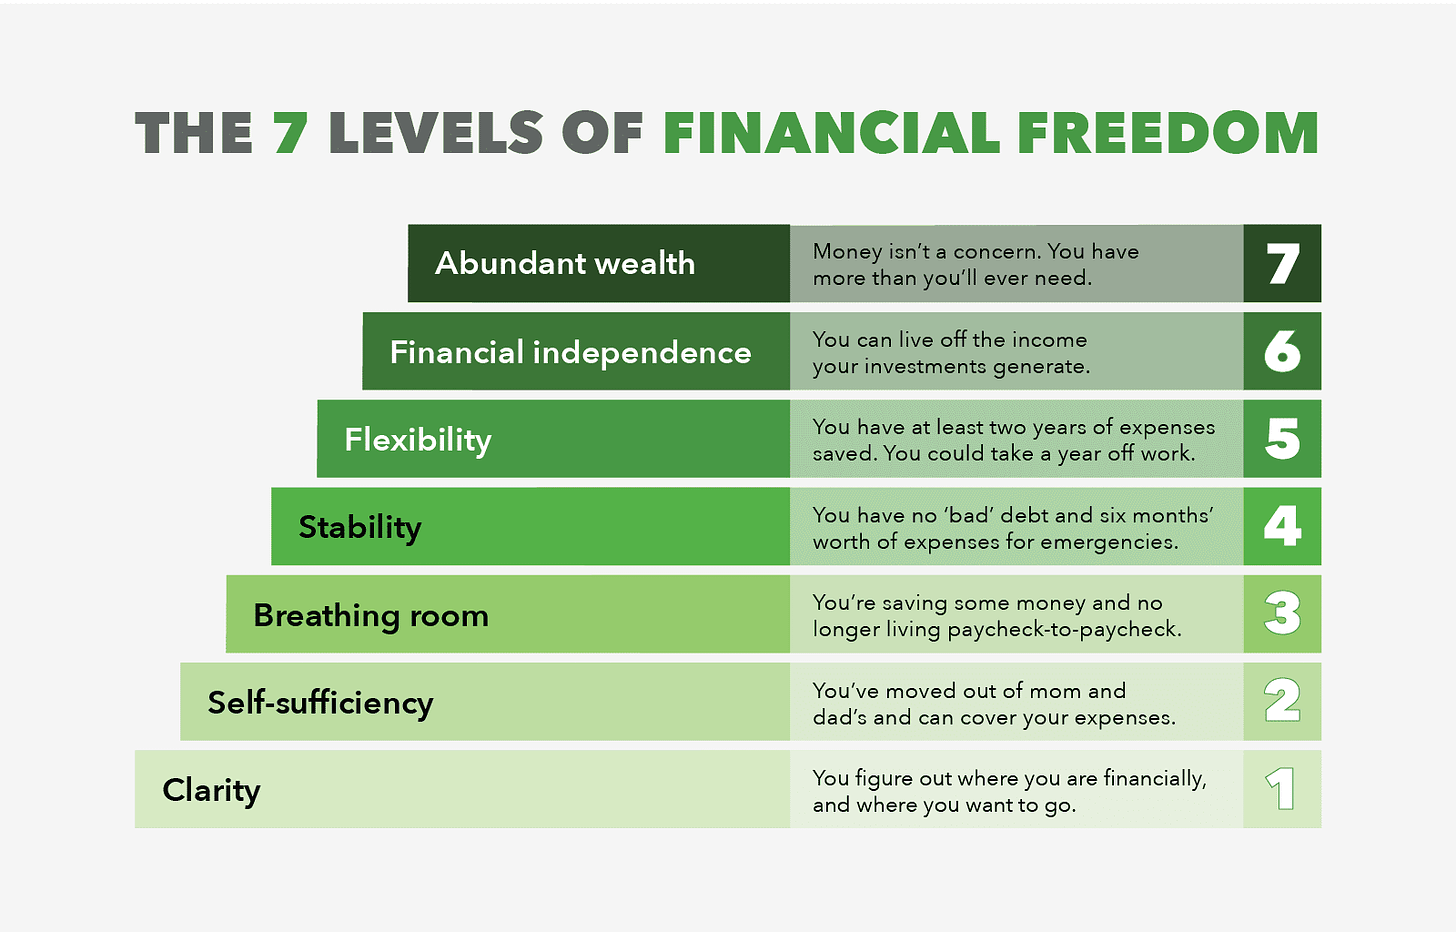 Graphic showing the seven steps to financial freedom. 1: Clarity, 2: Self-sufficiency, 3: Breathing room, 4: Stability, 5: Flexibility, 6: Financial independence, 7: Abundant wealth